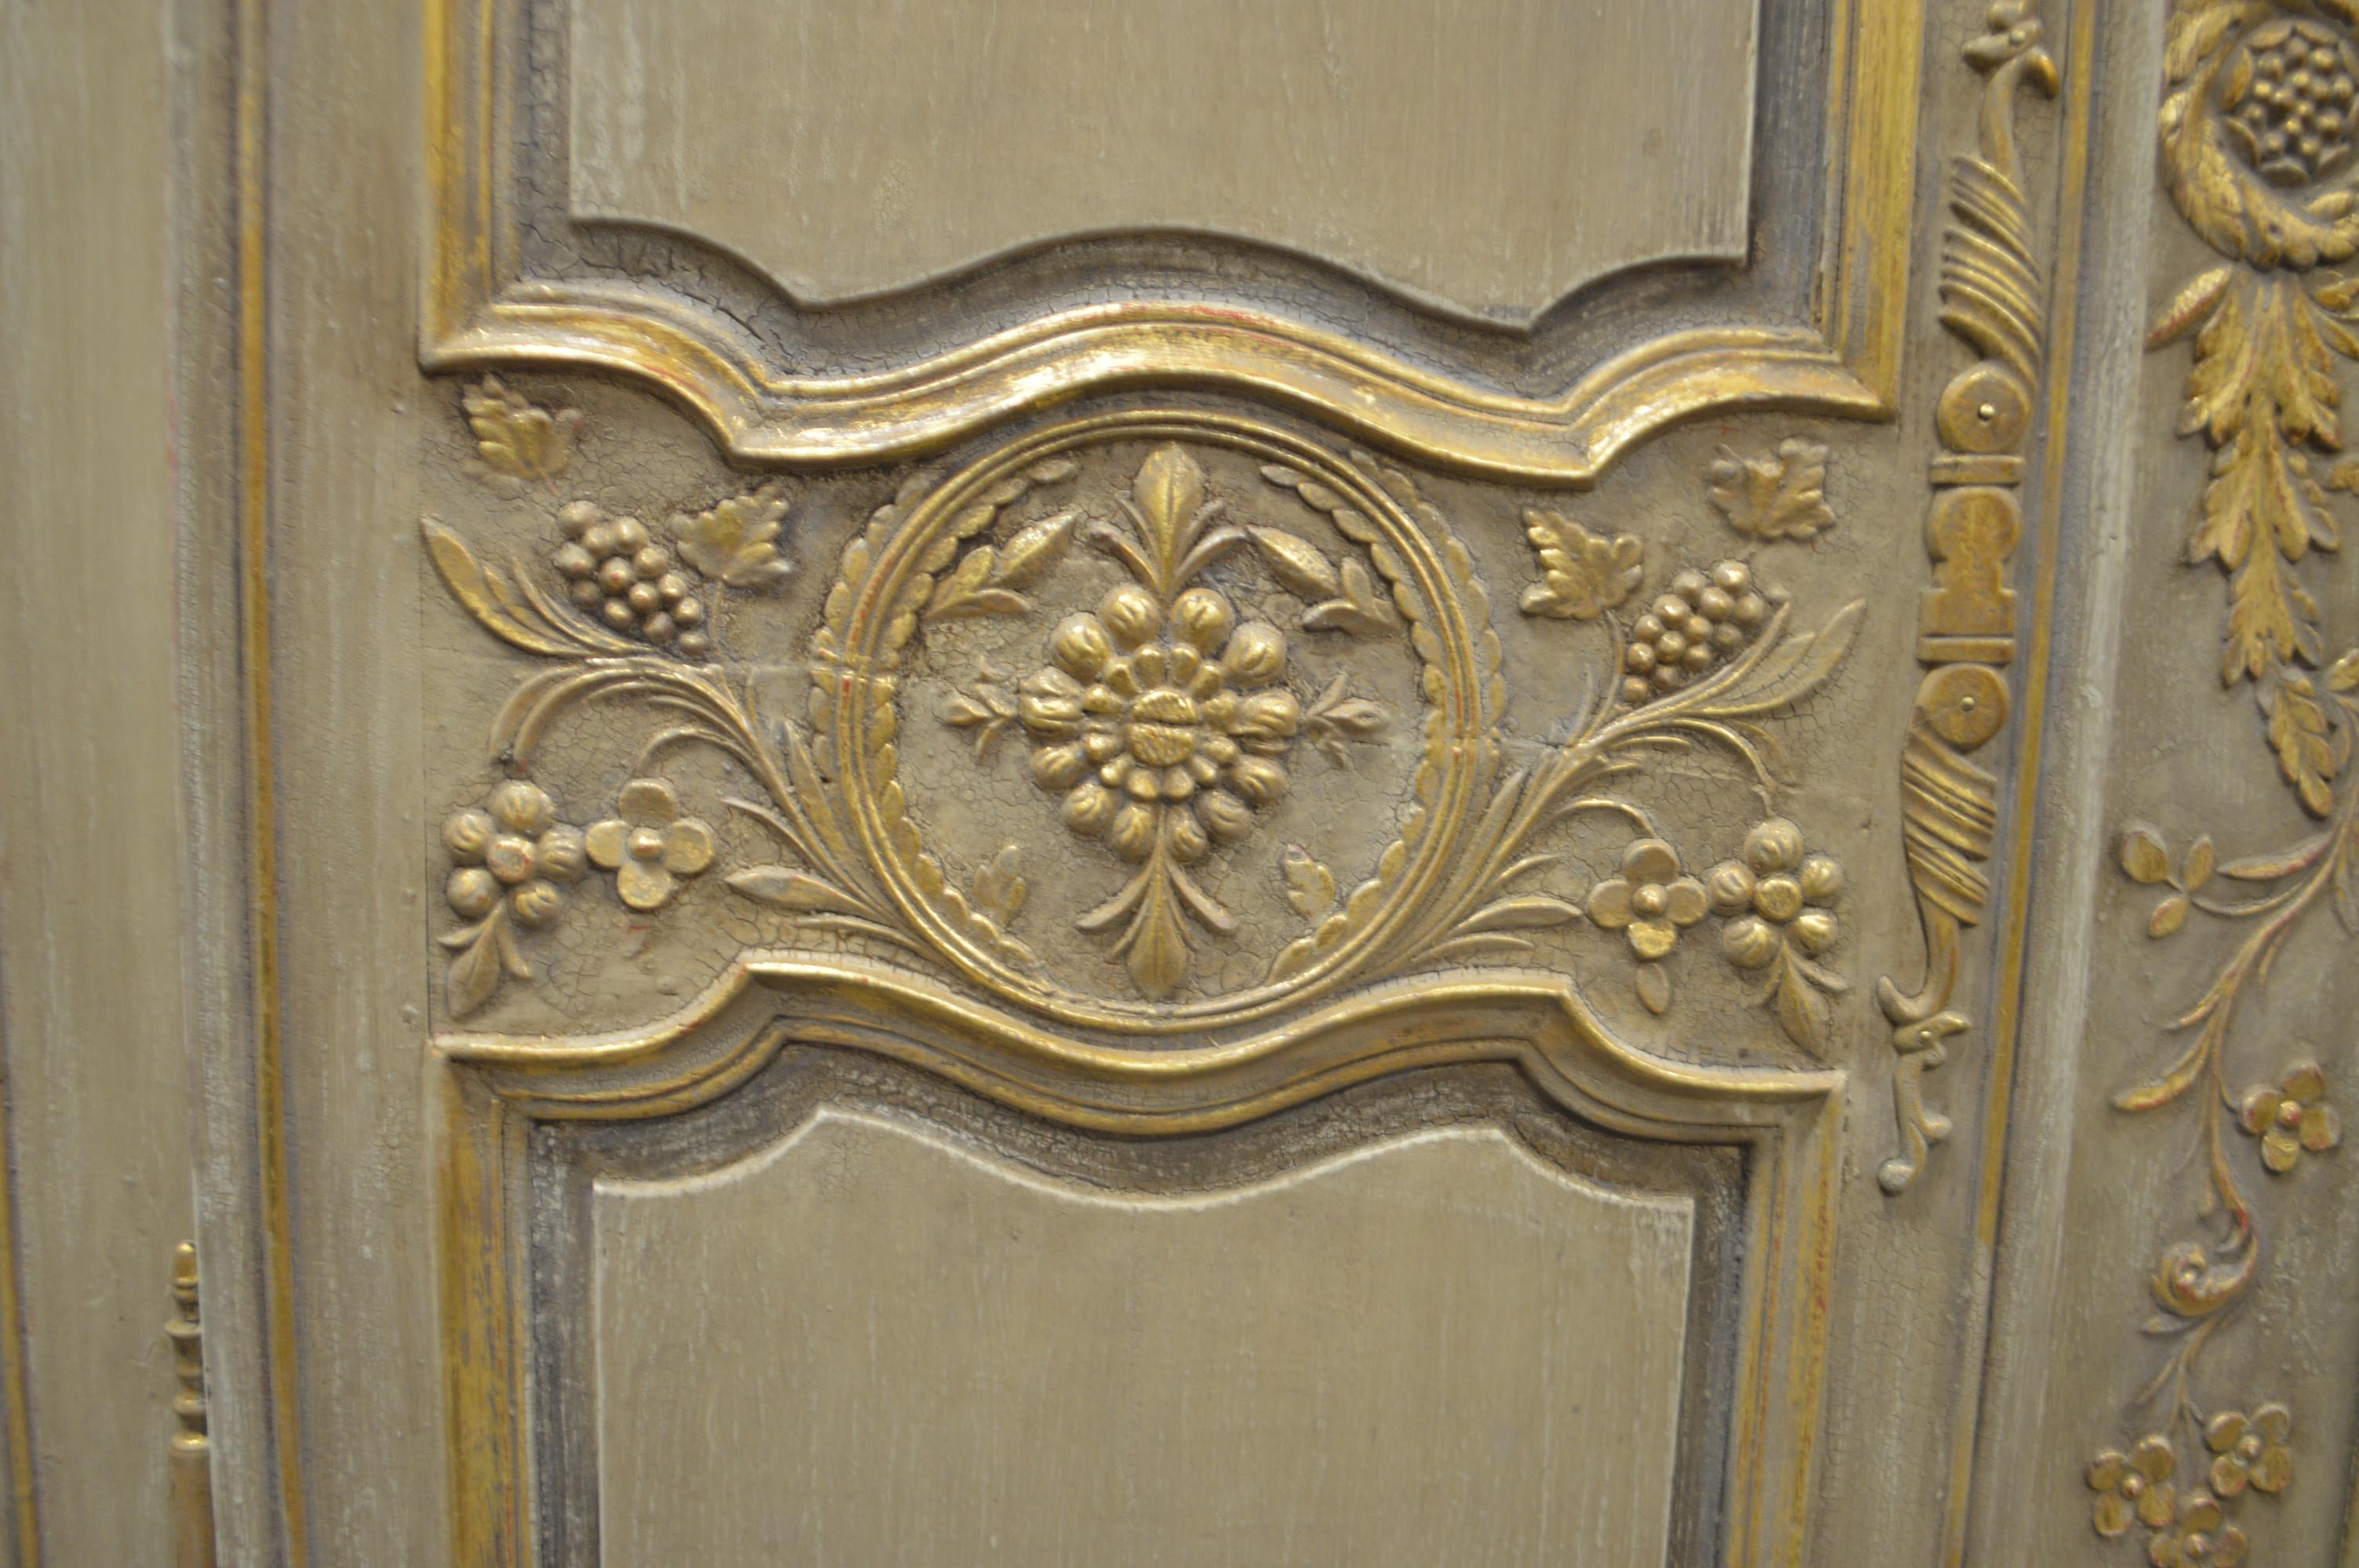 Louis XV style armoire, highly decorative, painted in a neutral tone with gold leaf details. The armoire is of the 19th century painted over solid
oak. There are fives shelves including the base and one drawer that opens from the outside. All the